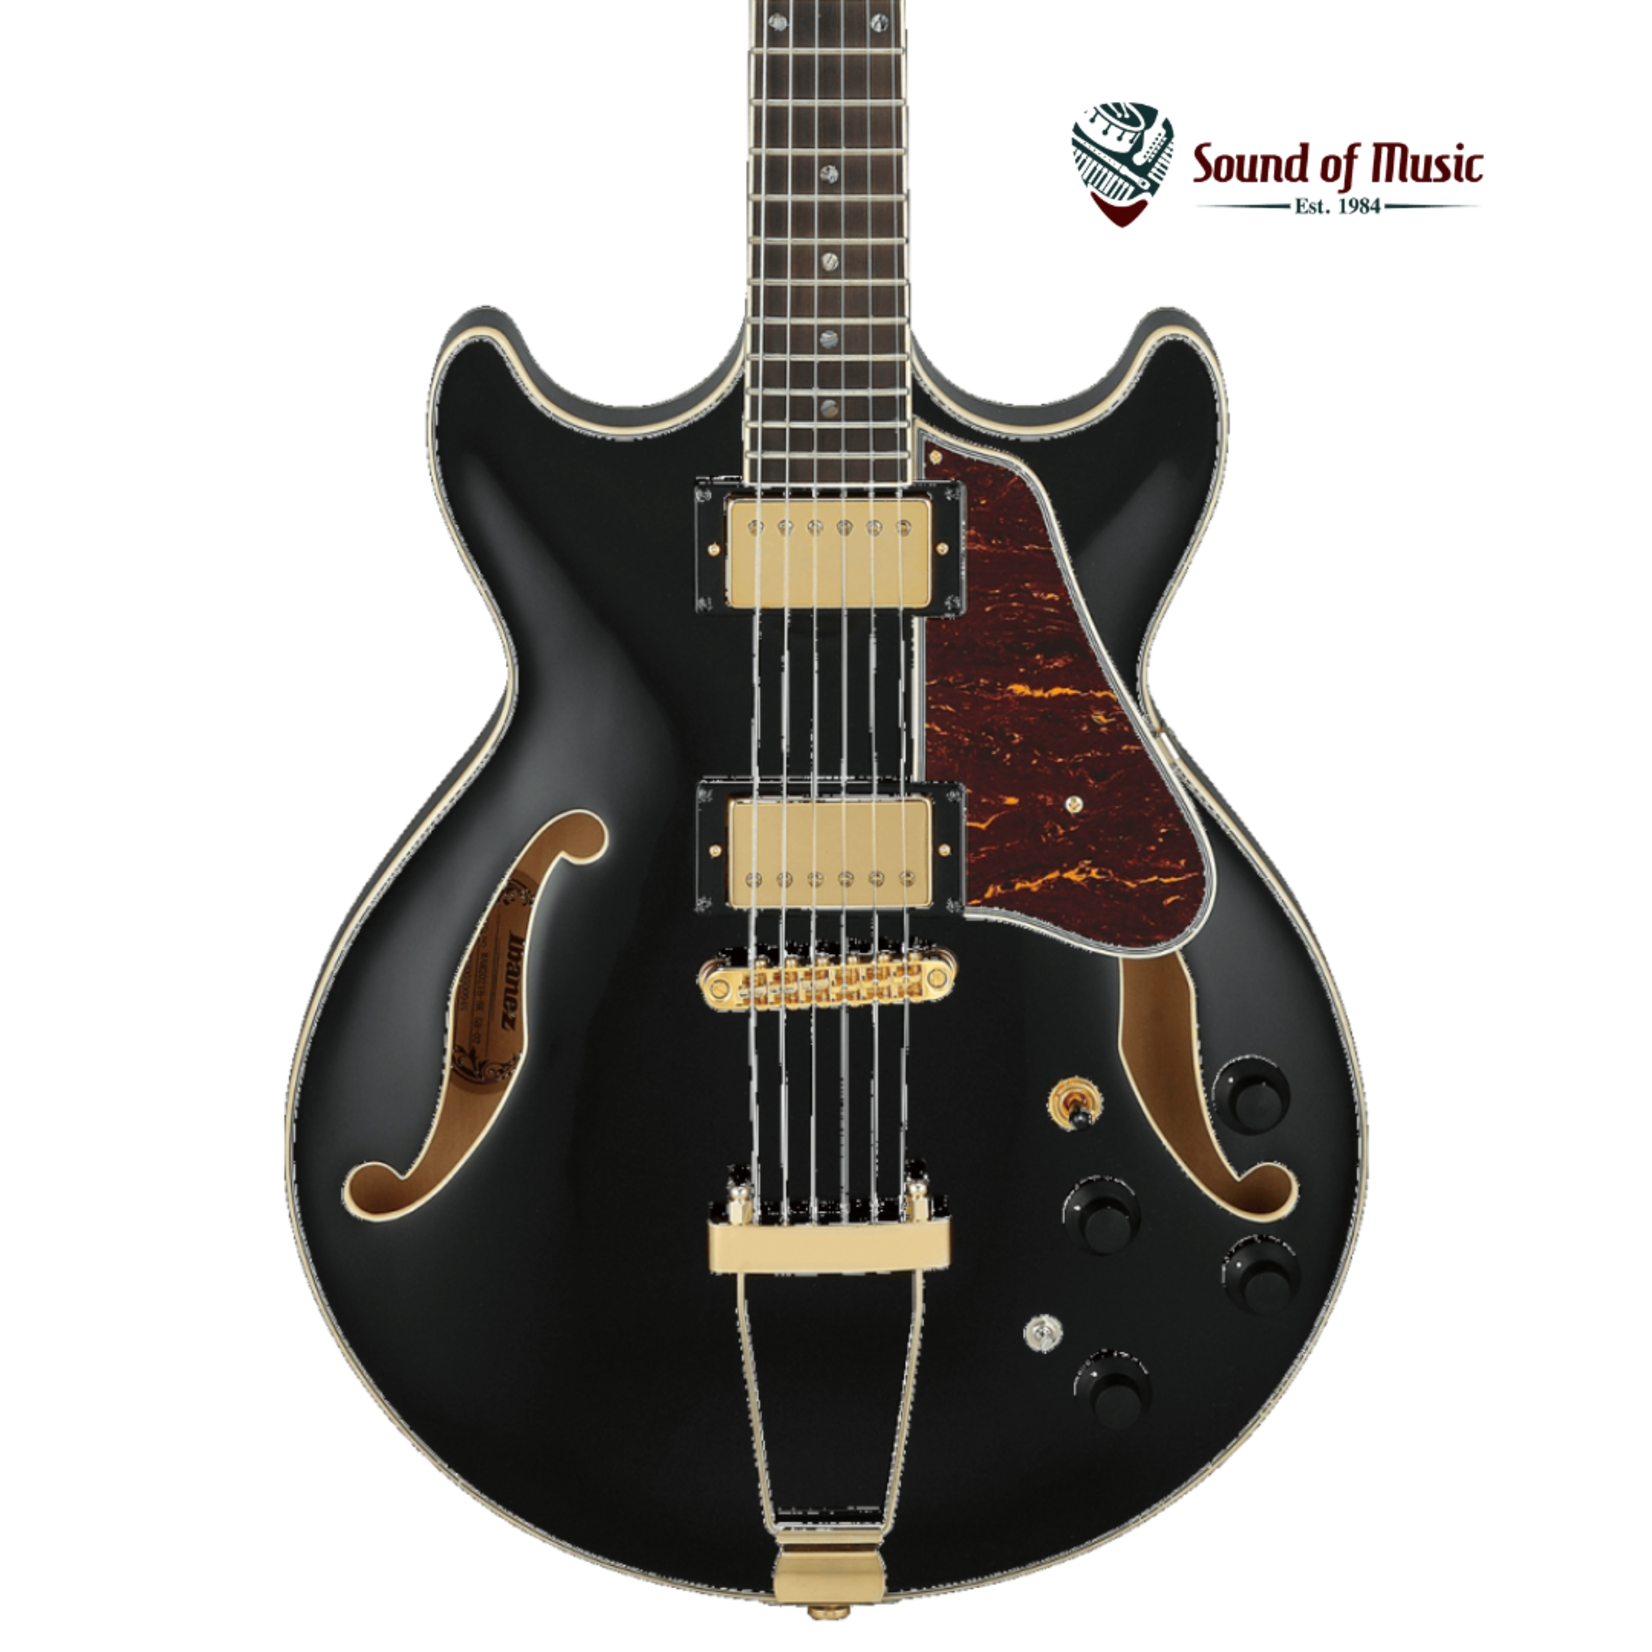 Ibanez AMH90 Artcore Expressionist Hollowbody Electric Guitar - Black